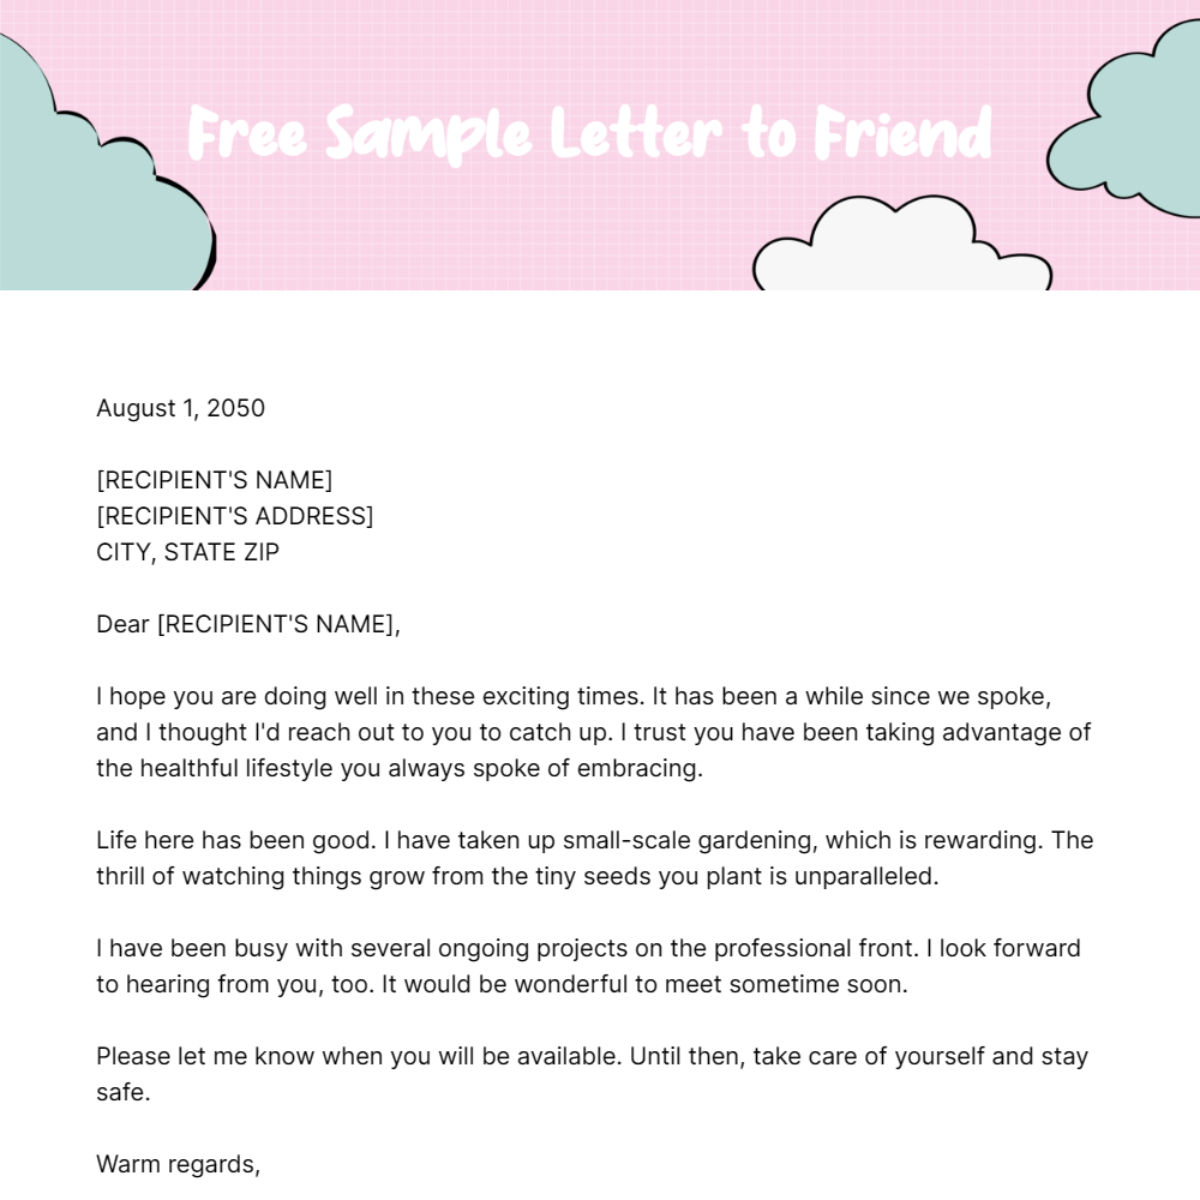 Free Sample Letter to Friend Template